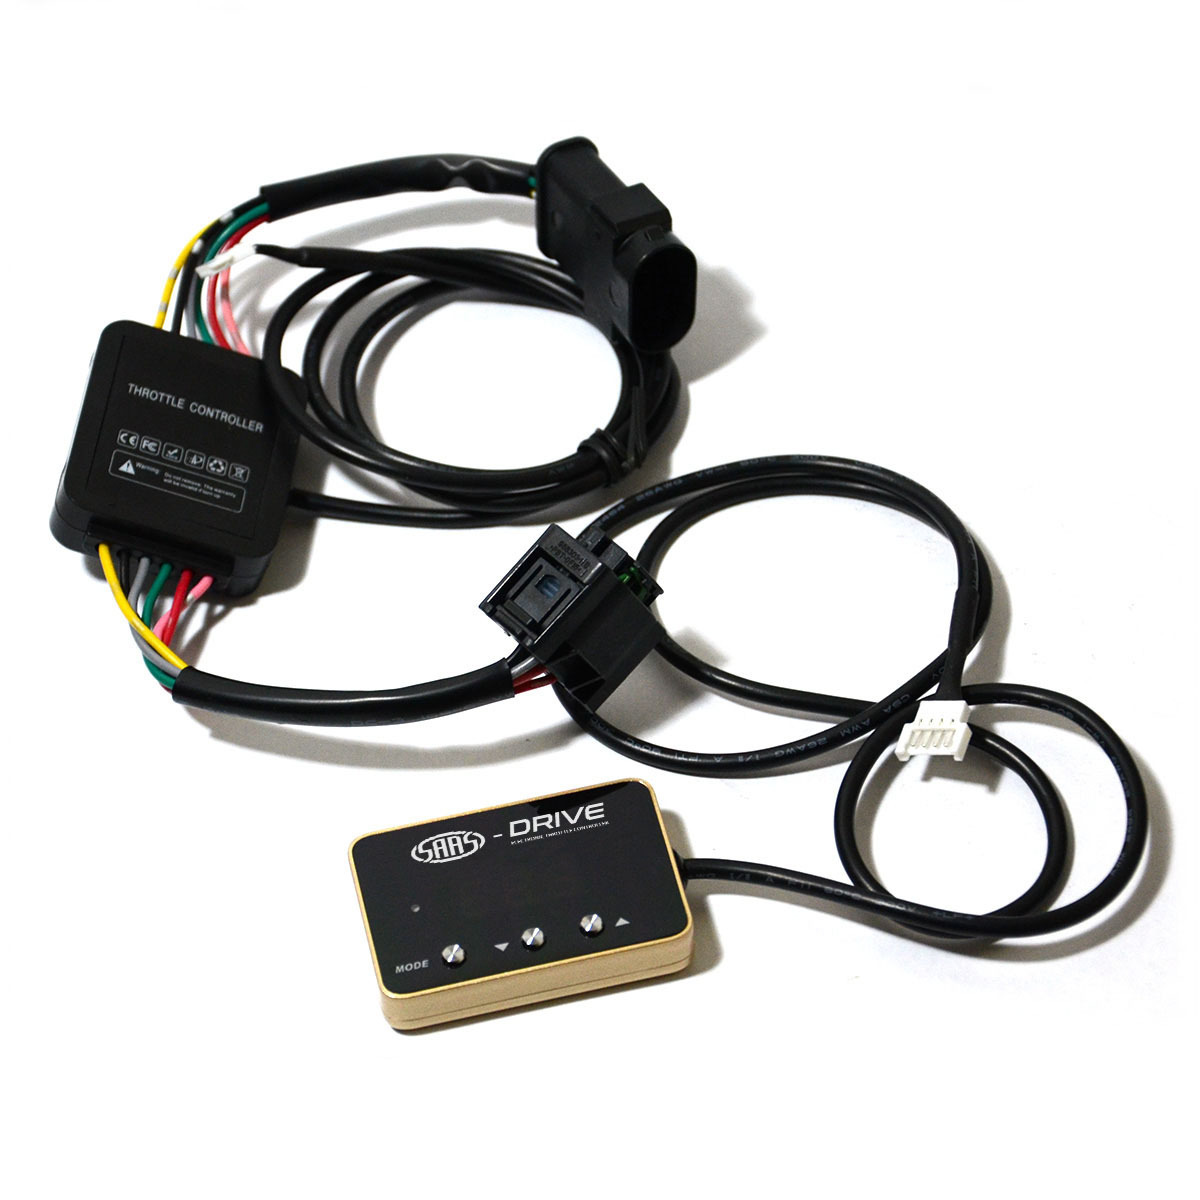 SAAS-Drive JEEP Throttle Controller 